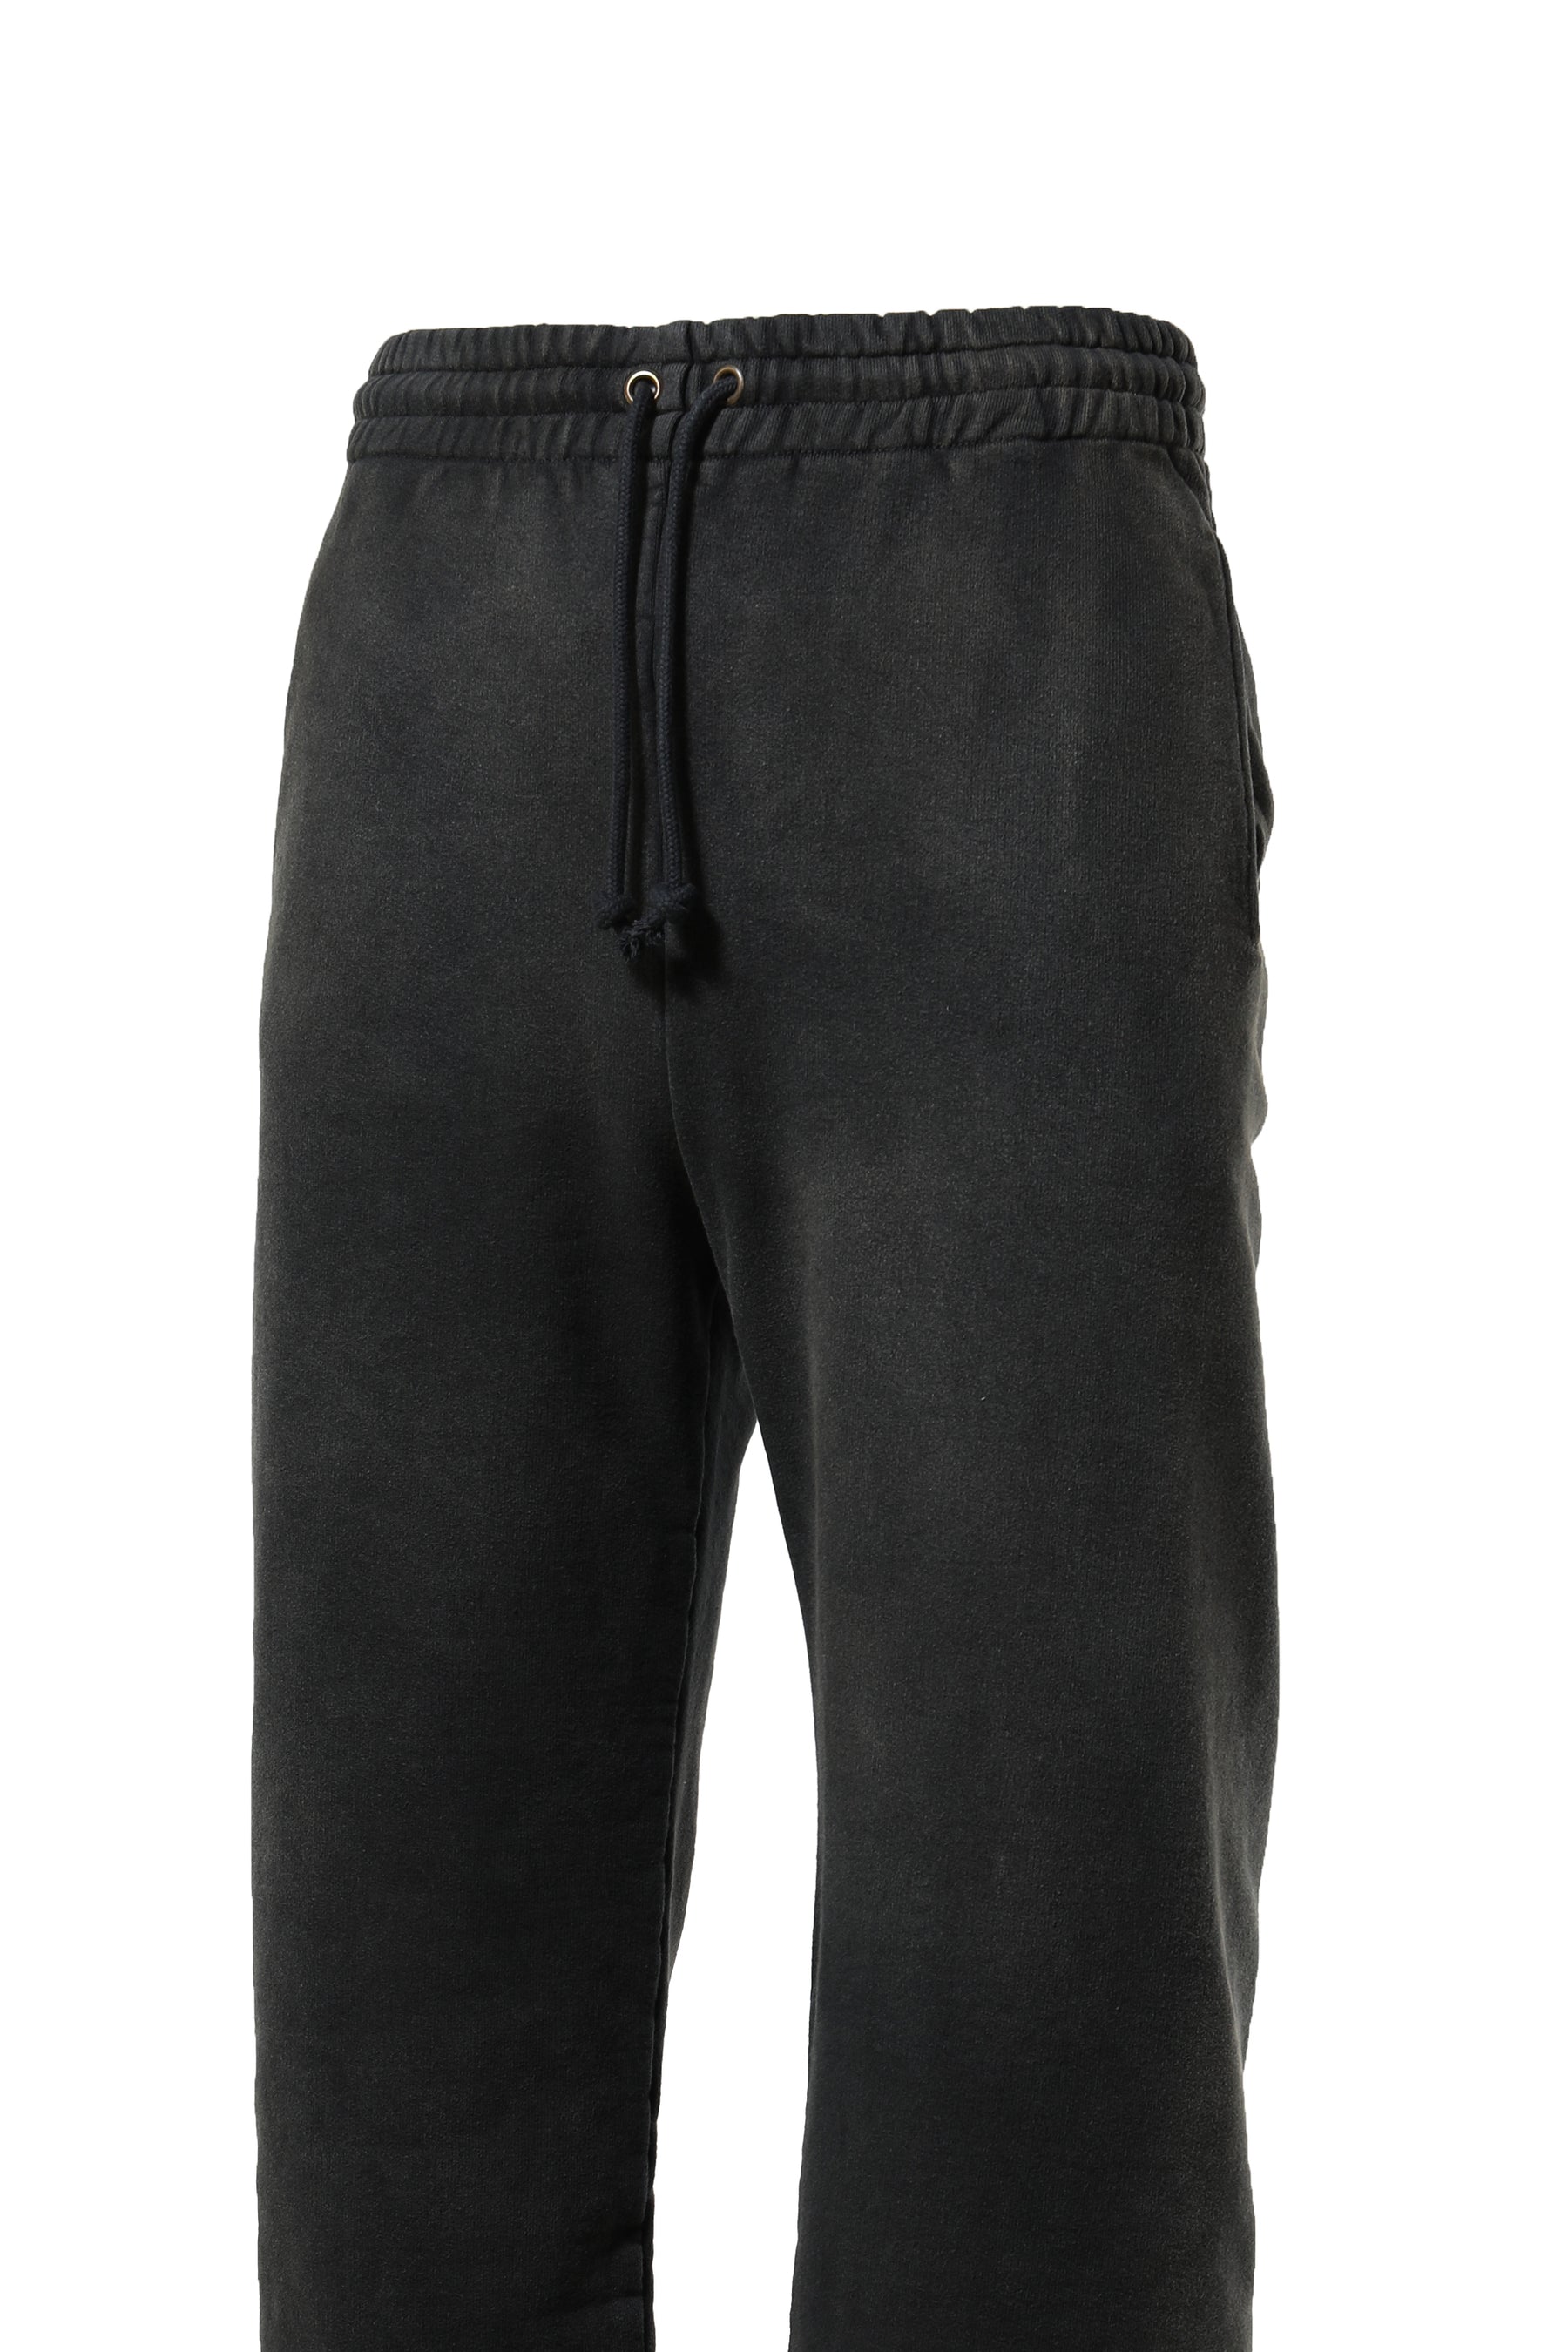 AGEING SWEAT PANTS / BLK AGEING